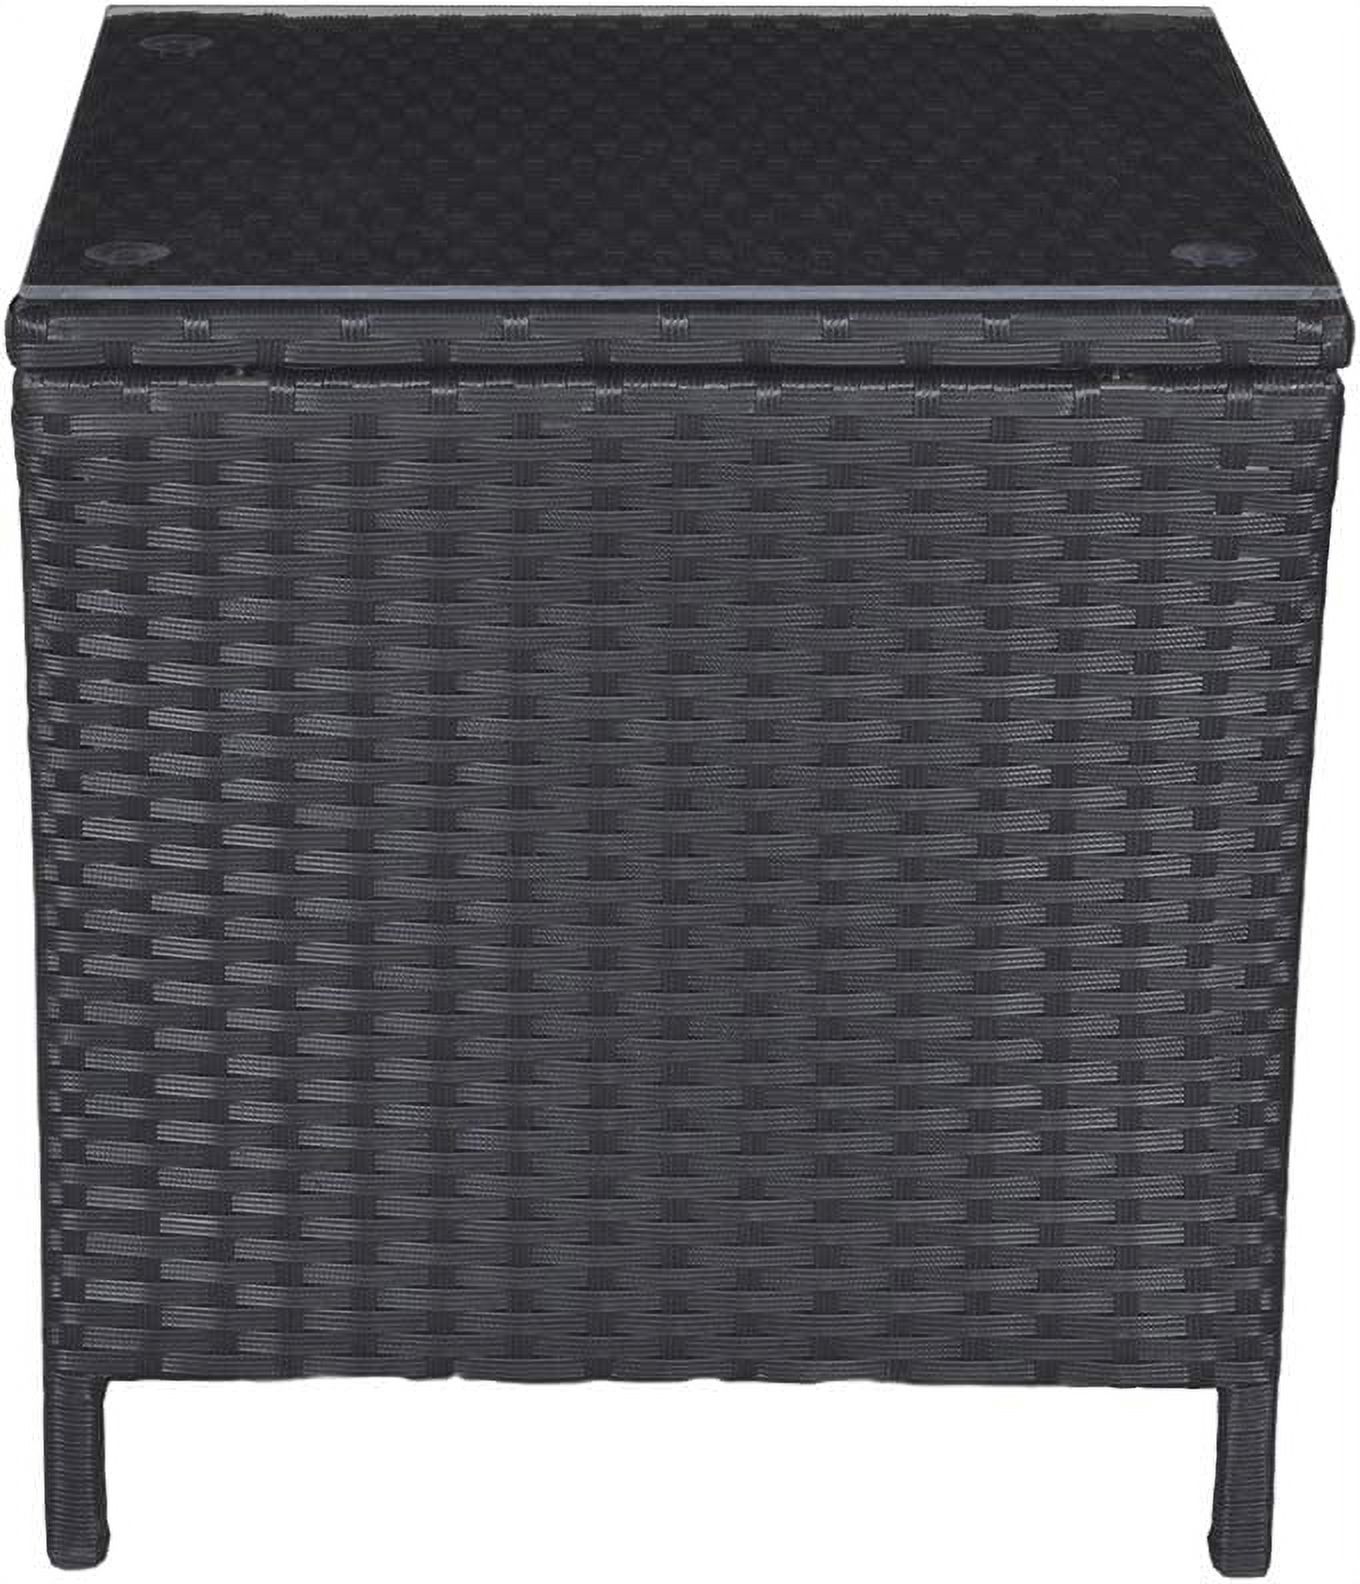 Royalcraft Outdoor Wicker Side Table, Porch Square Patio Side Coffee Tables All Weather Resistant Outside End Table with Glass Top and Storage, Black - image 2 of 7